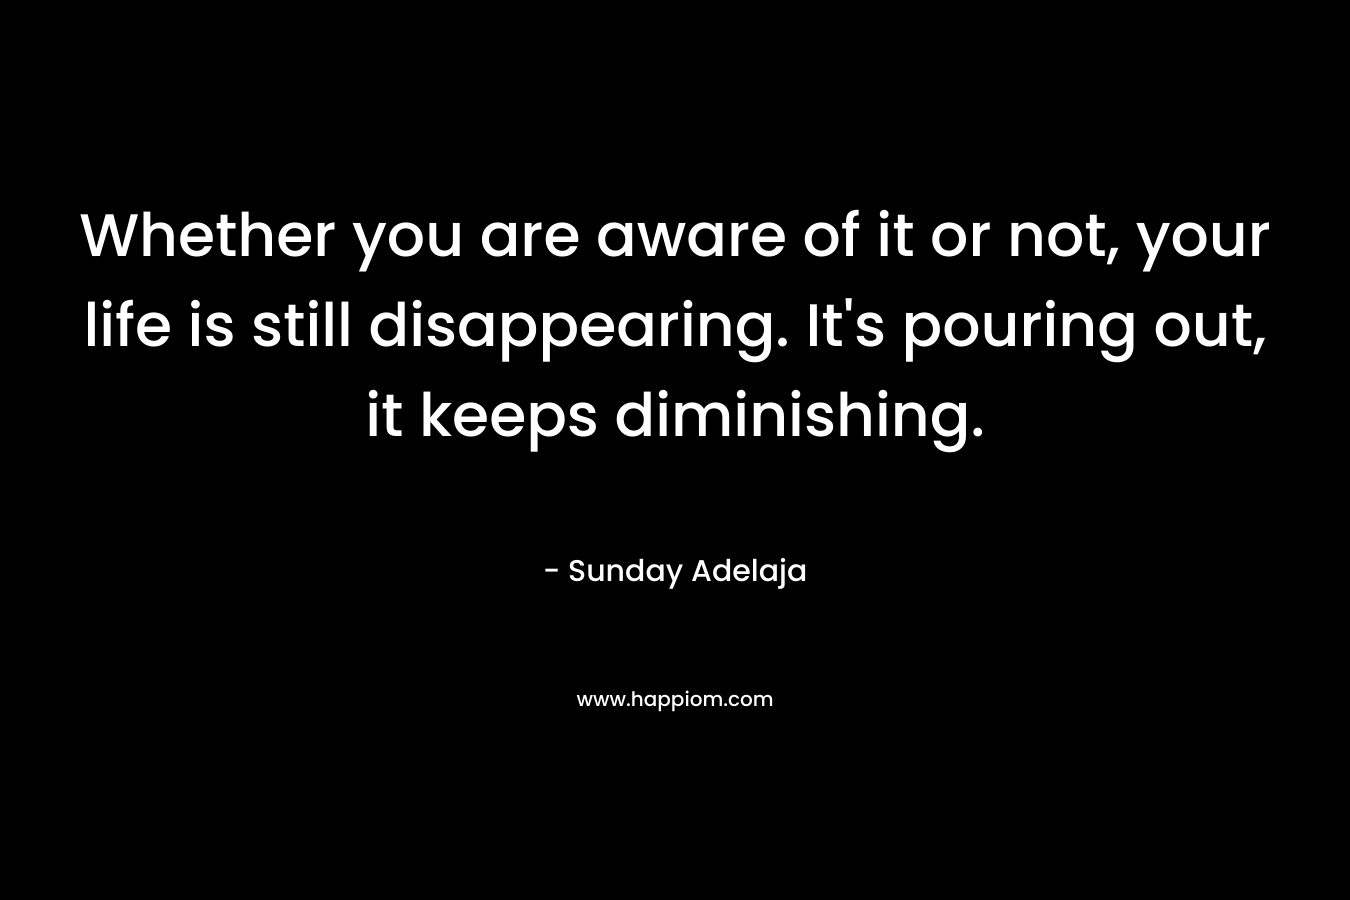 Whether you are aware of it or not, your life is still disappearing. It's pouring out, it keeps diminishing.